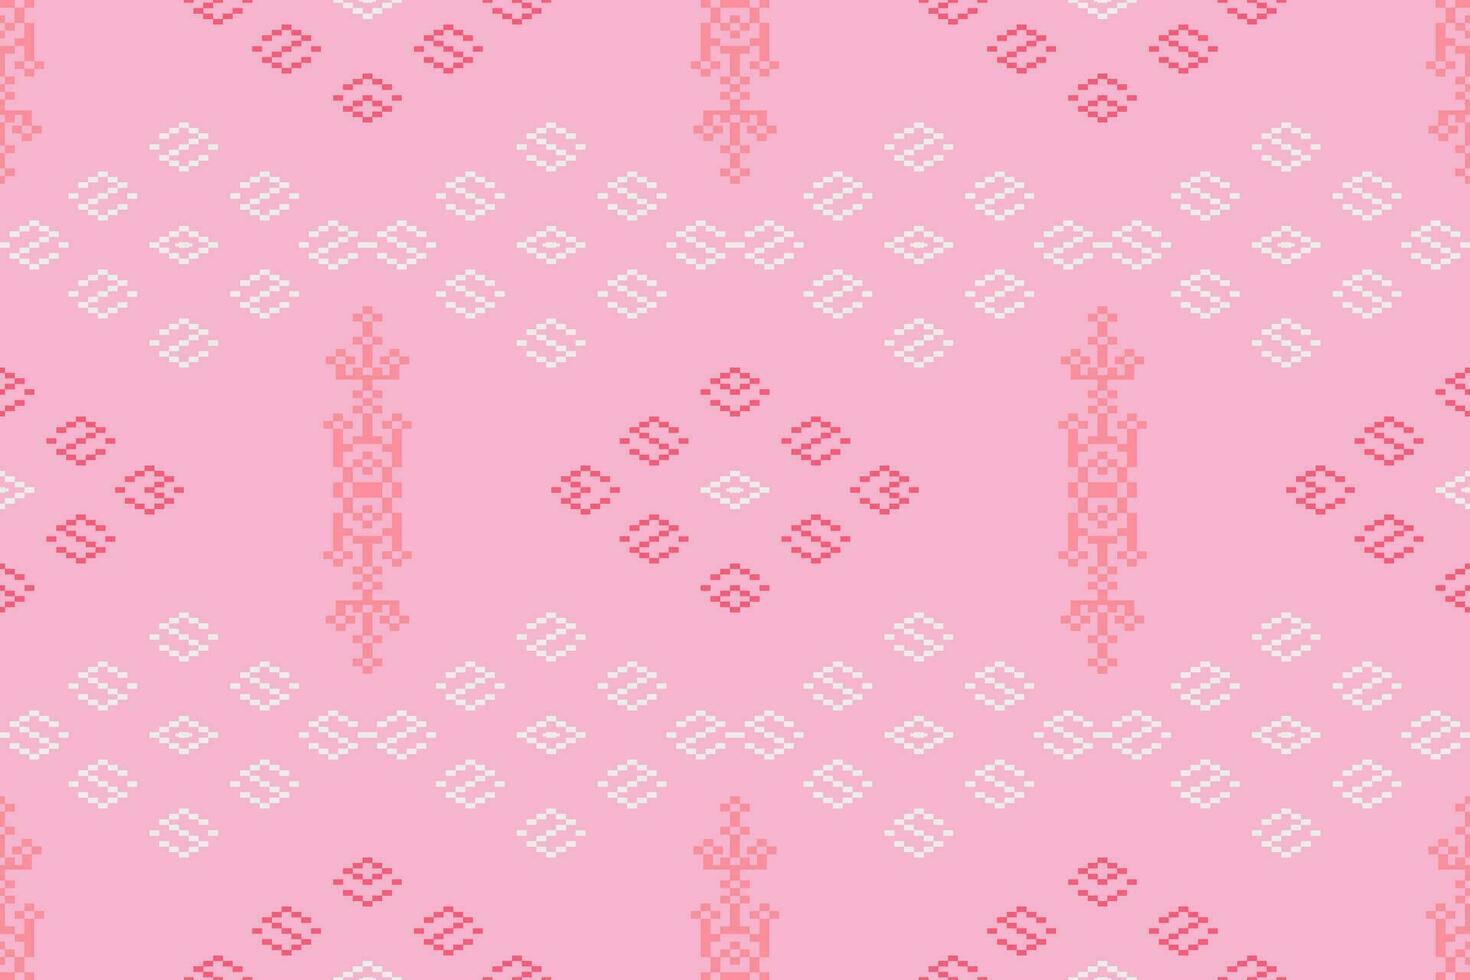 Ethnic abstract ikat.Seamless pattern in tribal.Native aztec boho vector design.Colorful geometric embroidery for Textiles,fabric,clothing,background,batik,knitwear,fashion